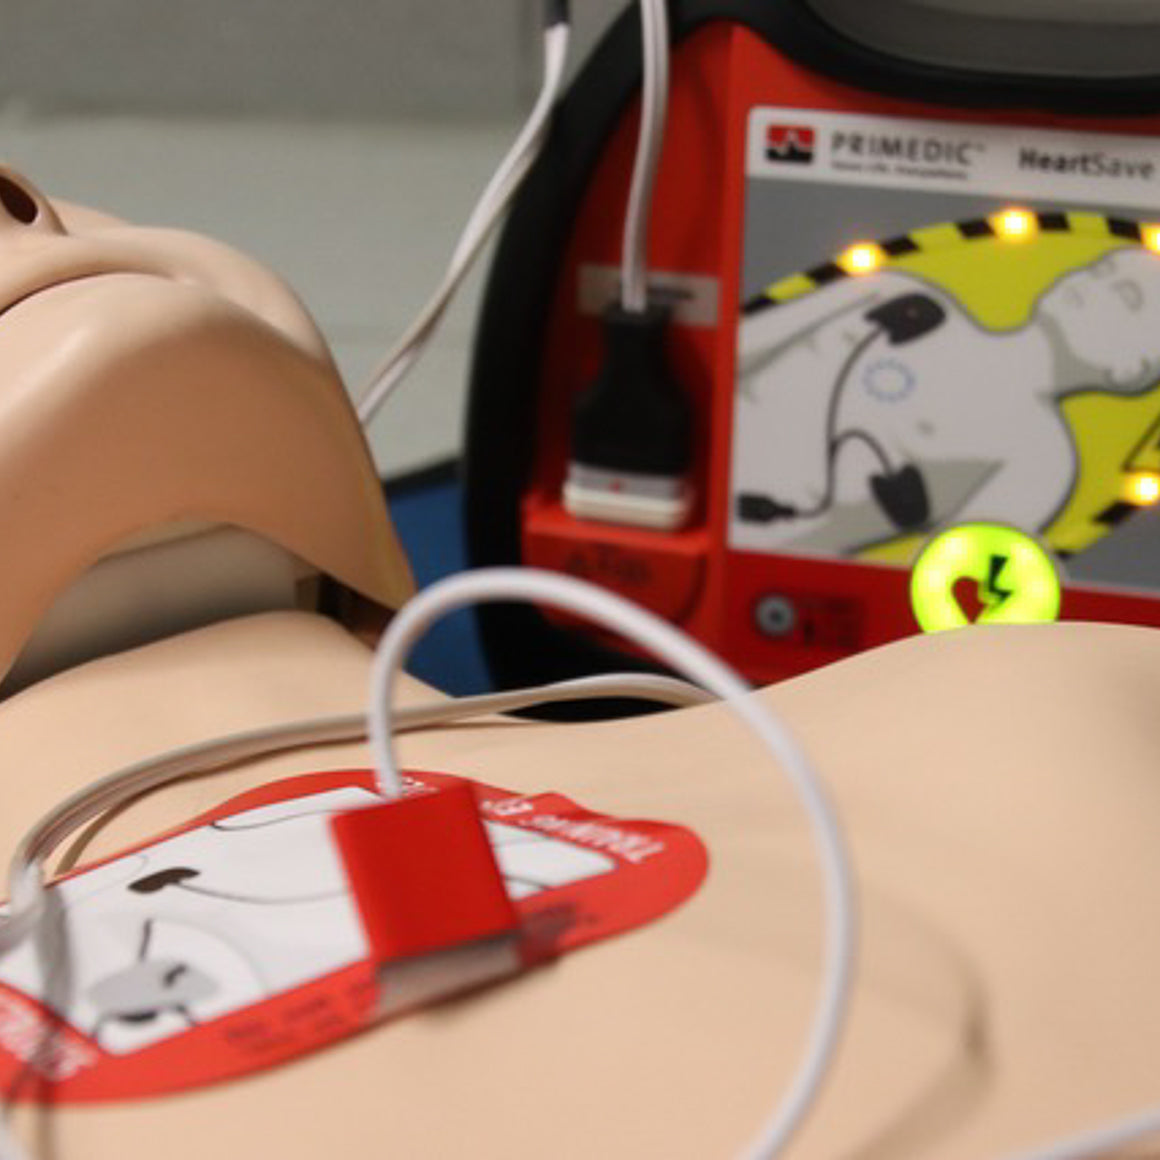 Engage Lifesaving Solutions, automated external defibrillator, AED to shock heart